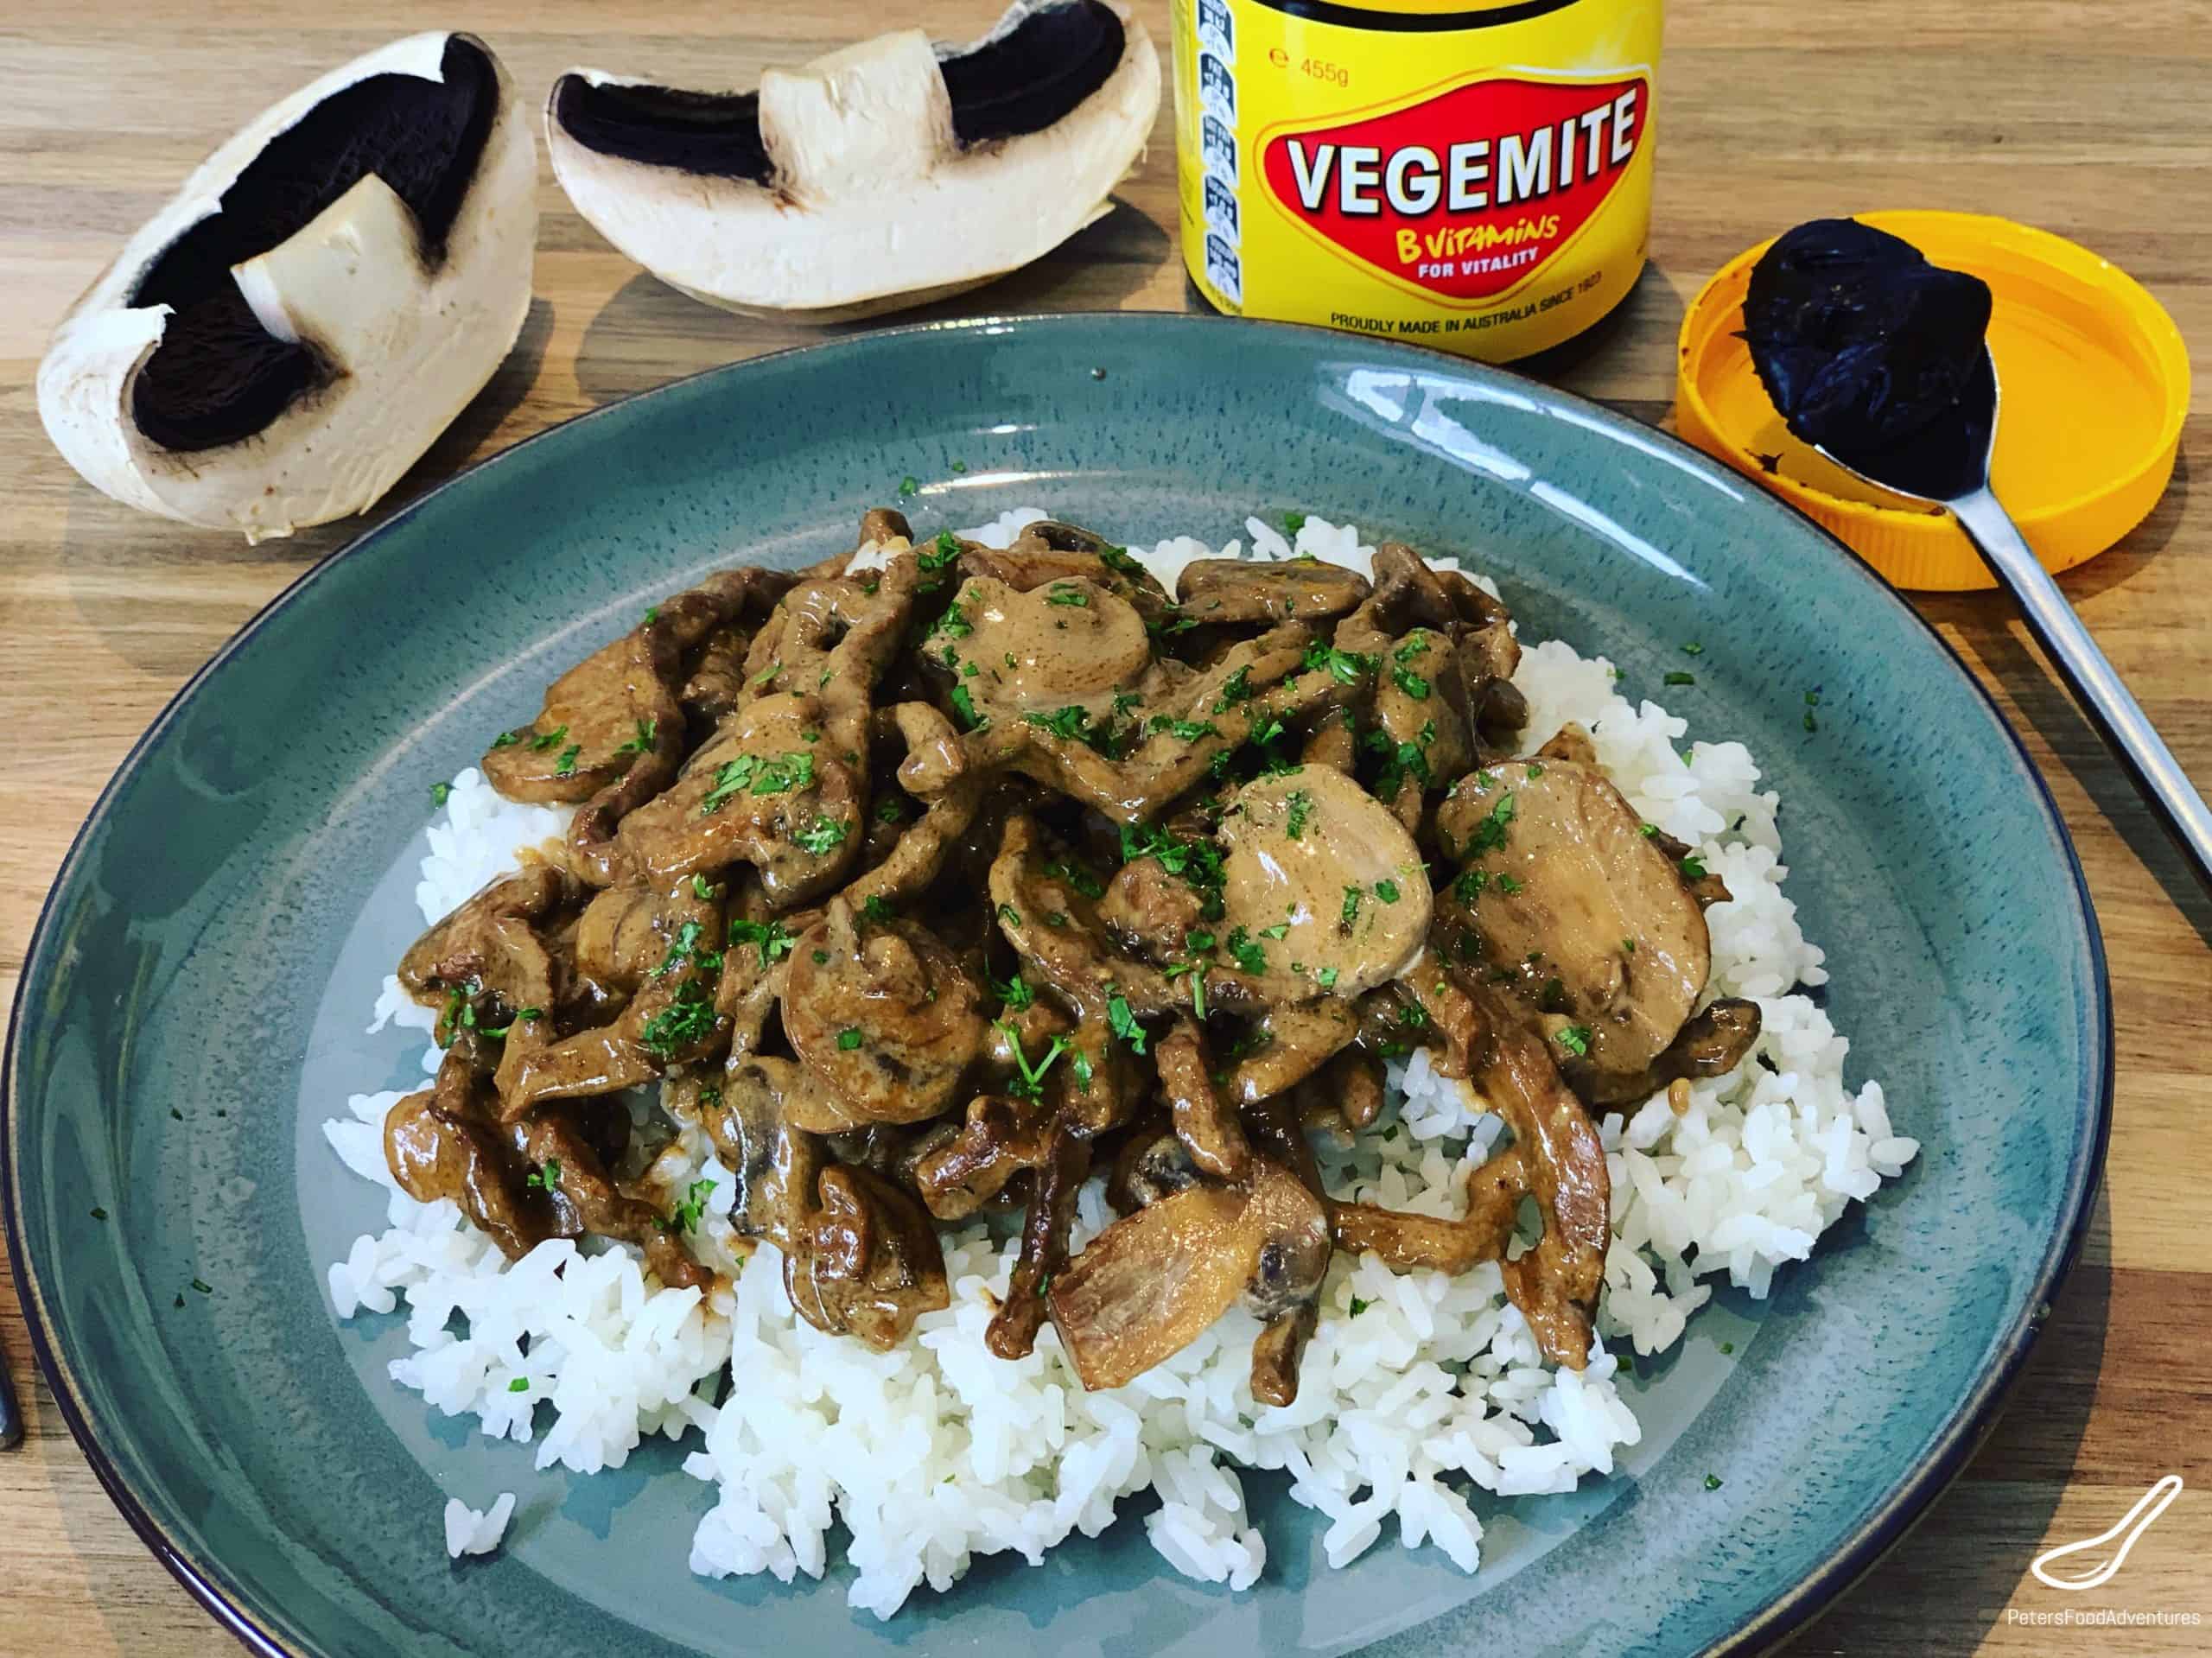 Vegemite Stroganoff made with Aussie Vegemite, made with beef, mushrooms and served over rice. A new Vegemite recipes everyone will love!